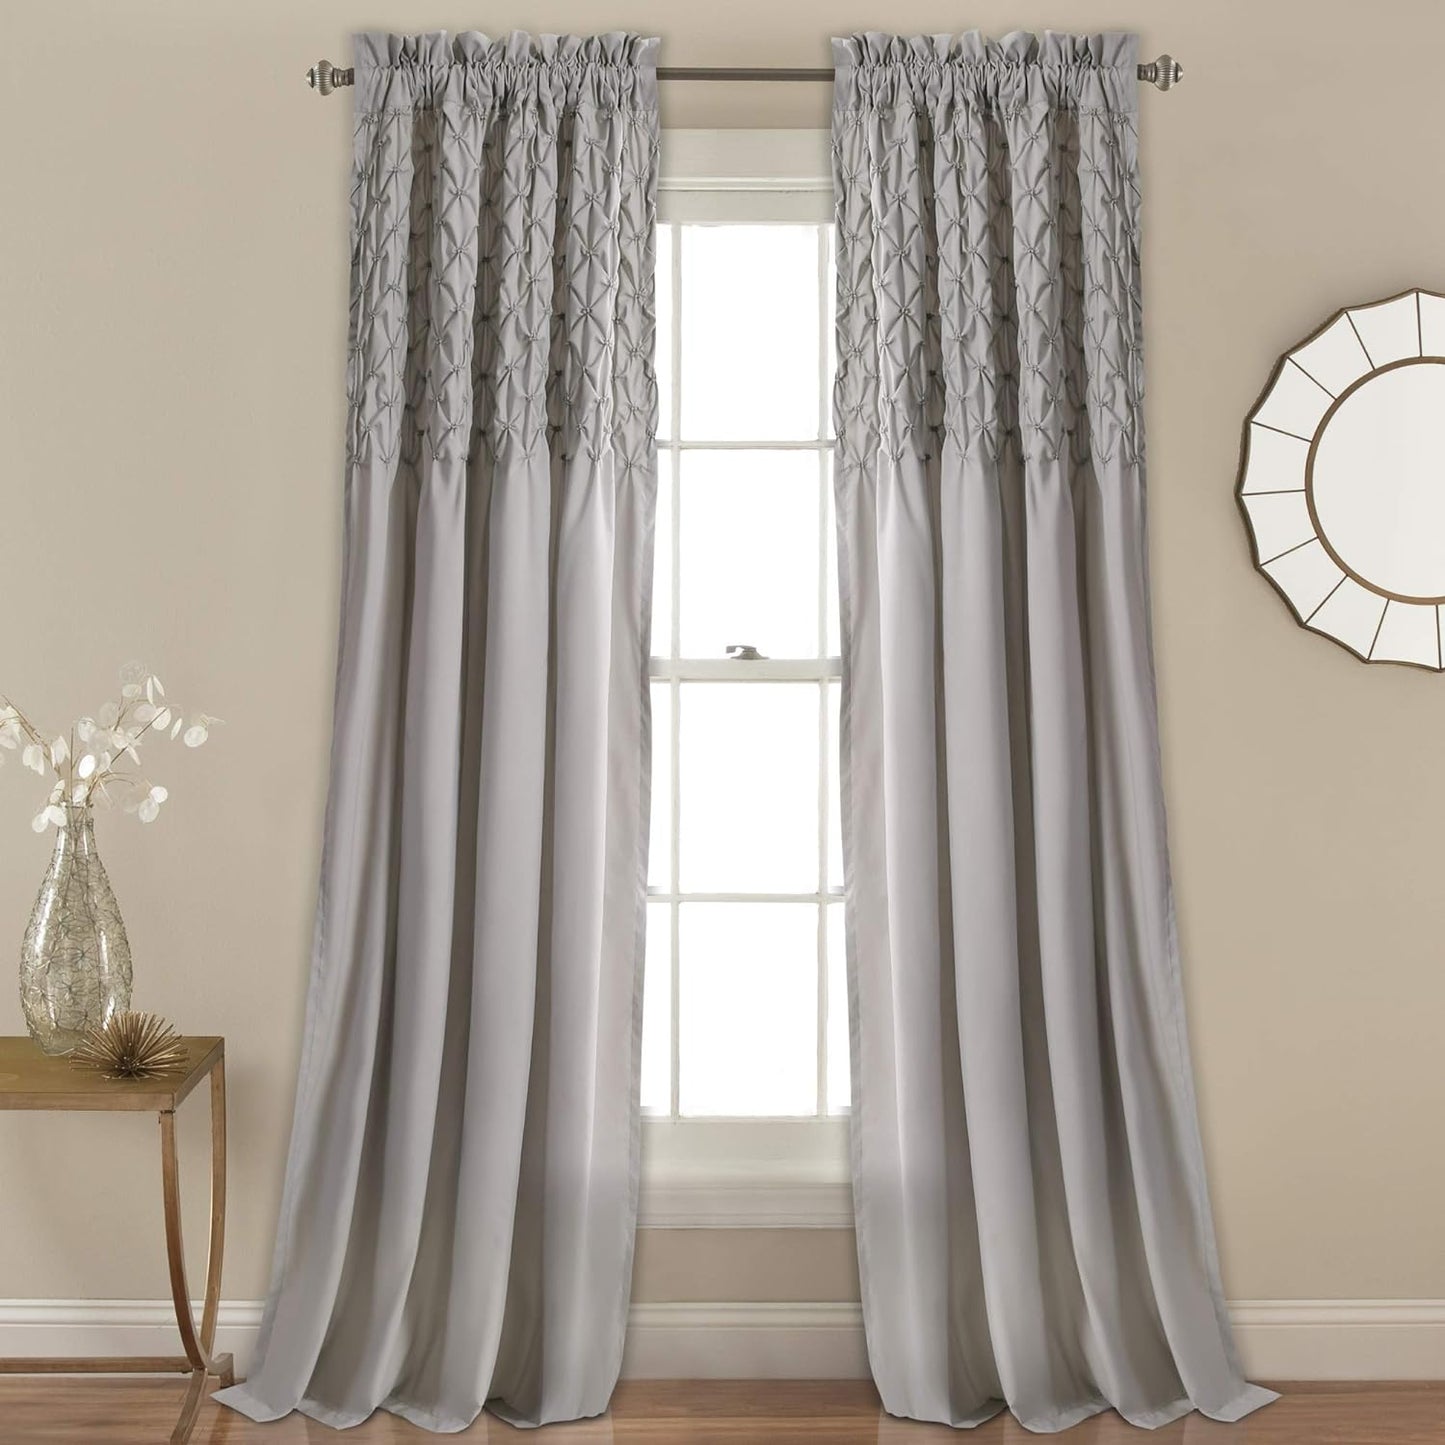 Lush Decor Bayview Curtains-Pintuck Textured Semi Sheer Window Panel Drapes Set for Living, Dining, Bedroom (Pair), 54" W X 84" L, White  Triangle Home Fashions Grey 54"W X 84"L 